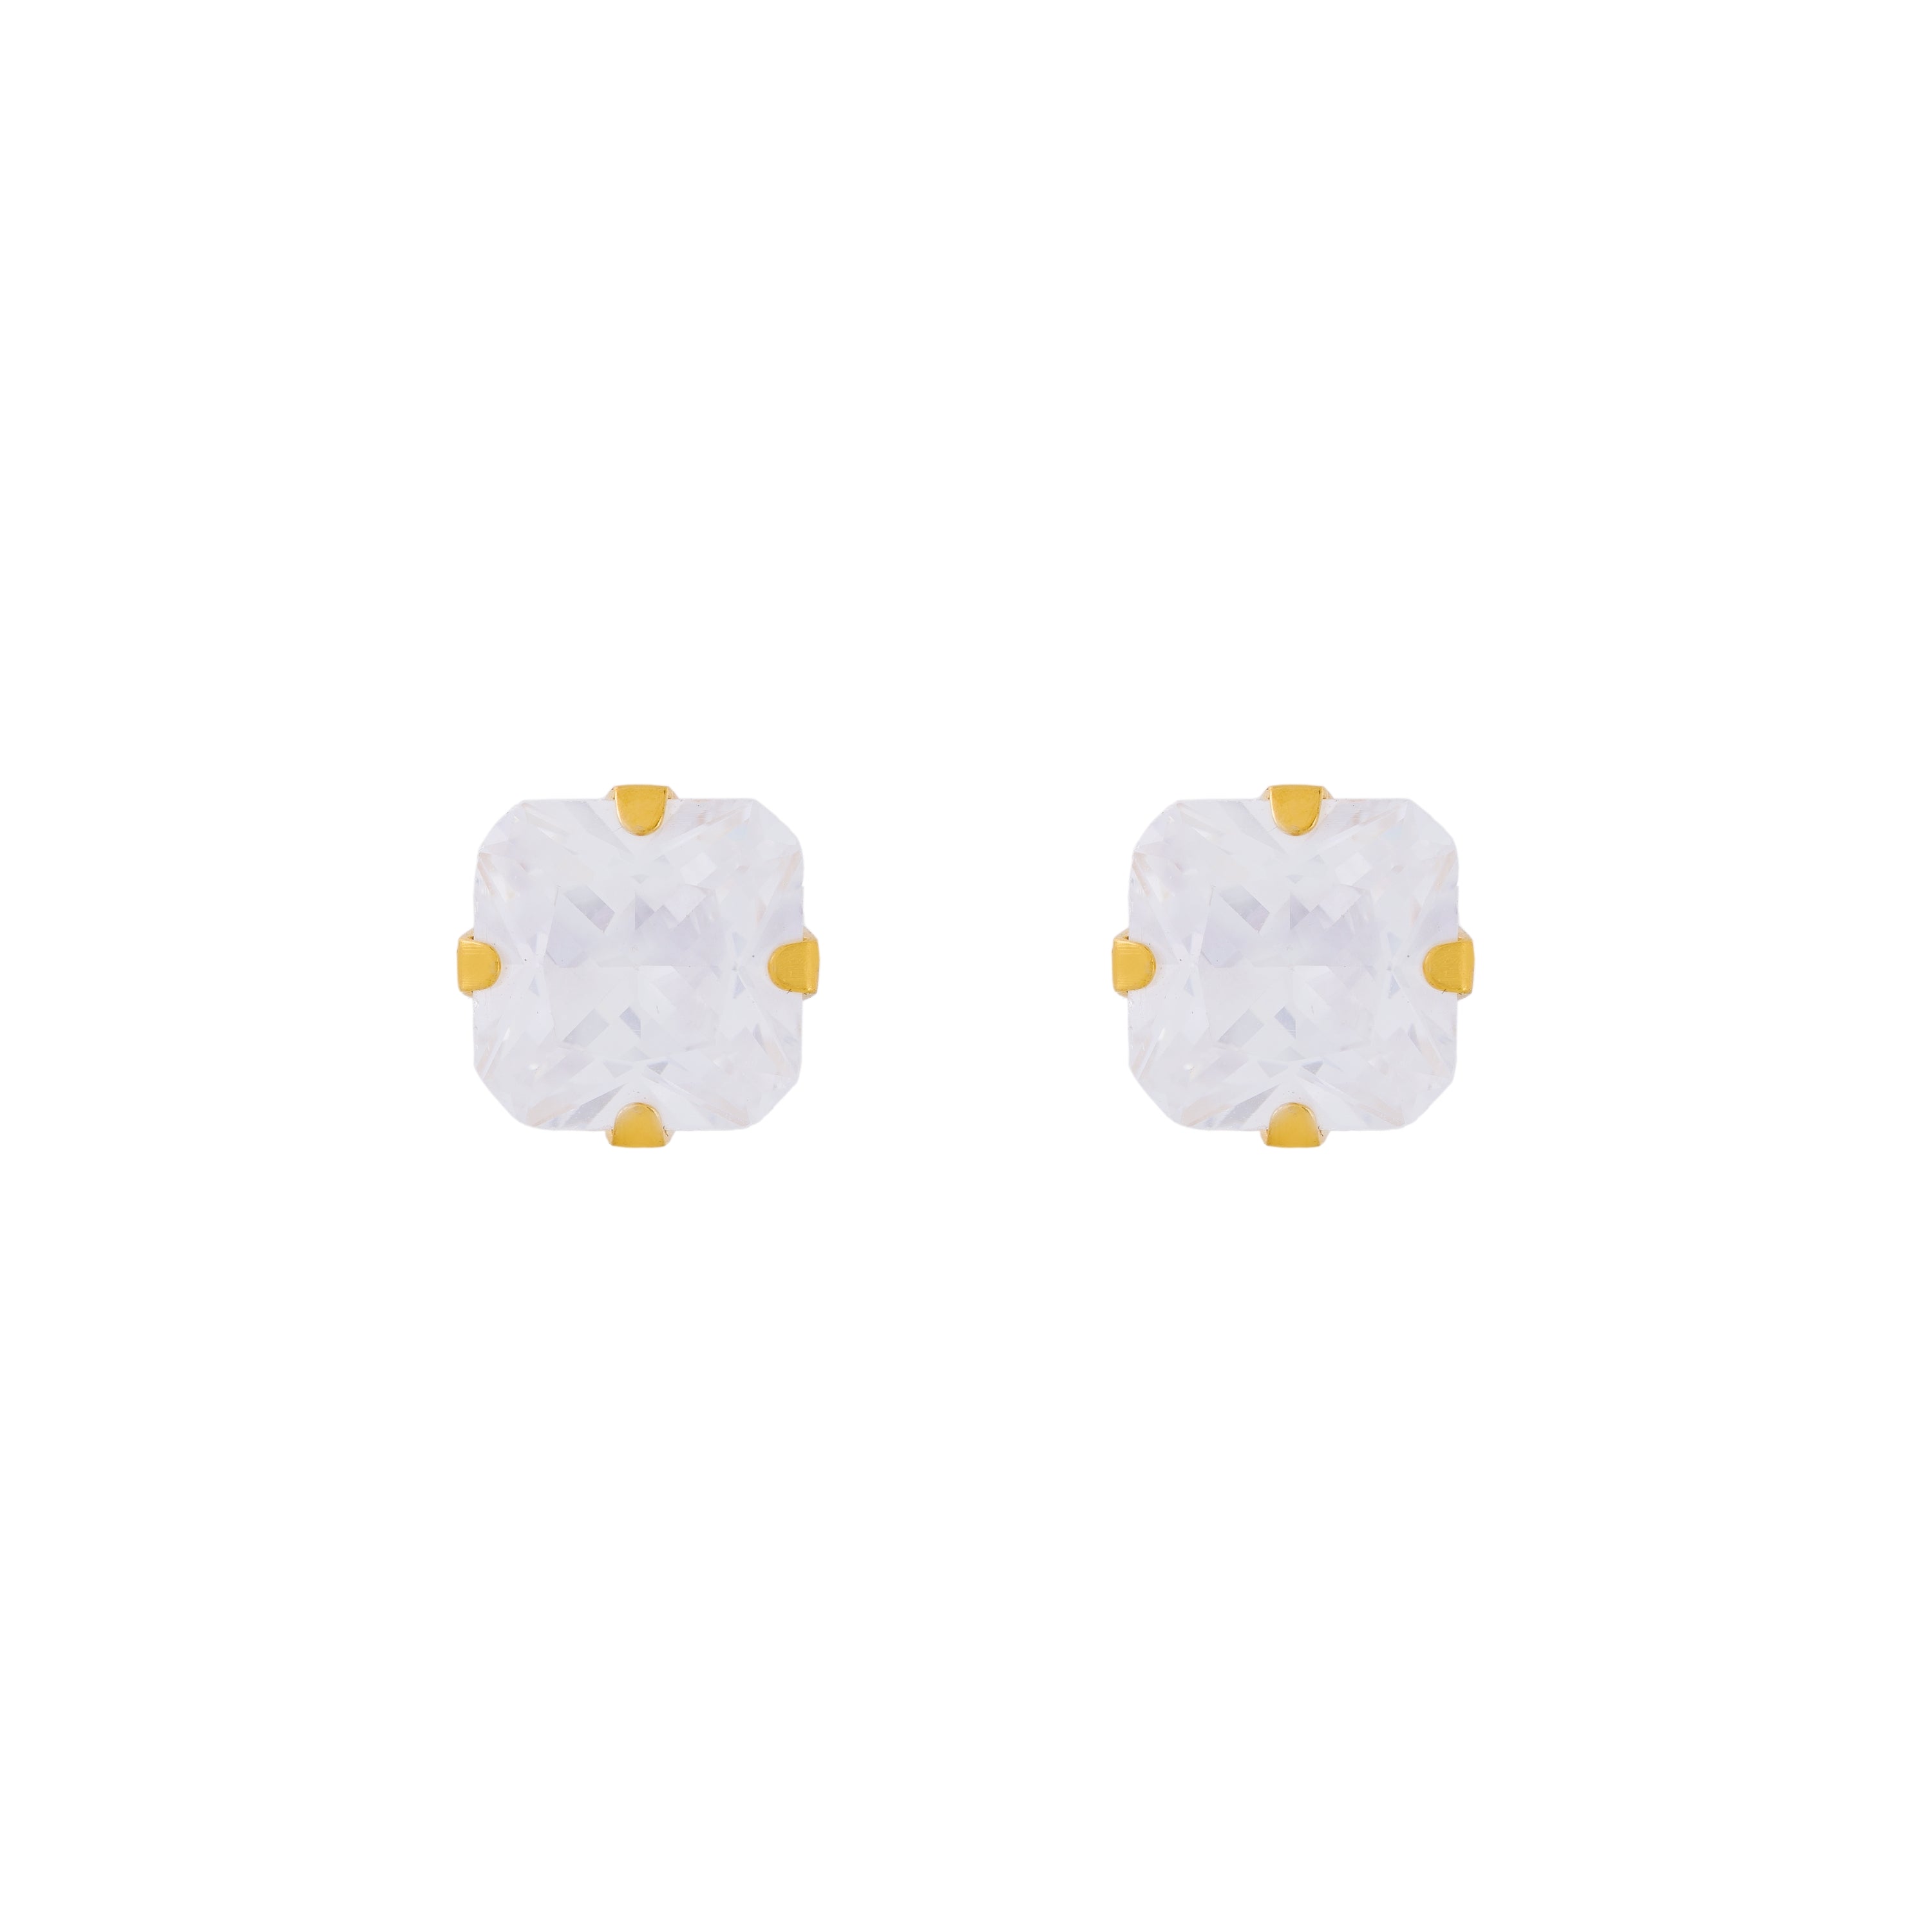 8X8MM Cubic Zirconia Princess Cut 24K Pure Gold Plated Ear Studs | MADE IN USA | Ideal for everyday wear